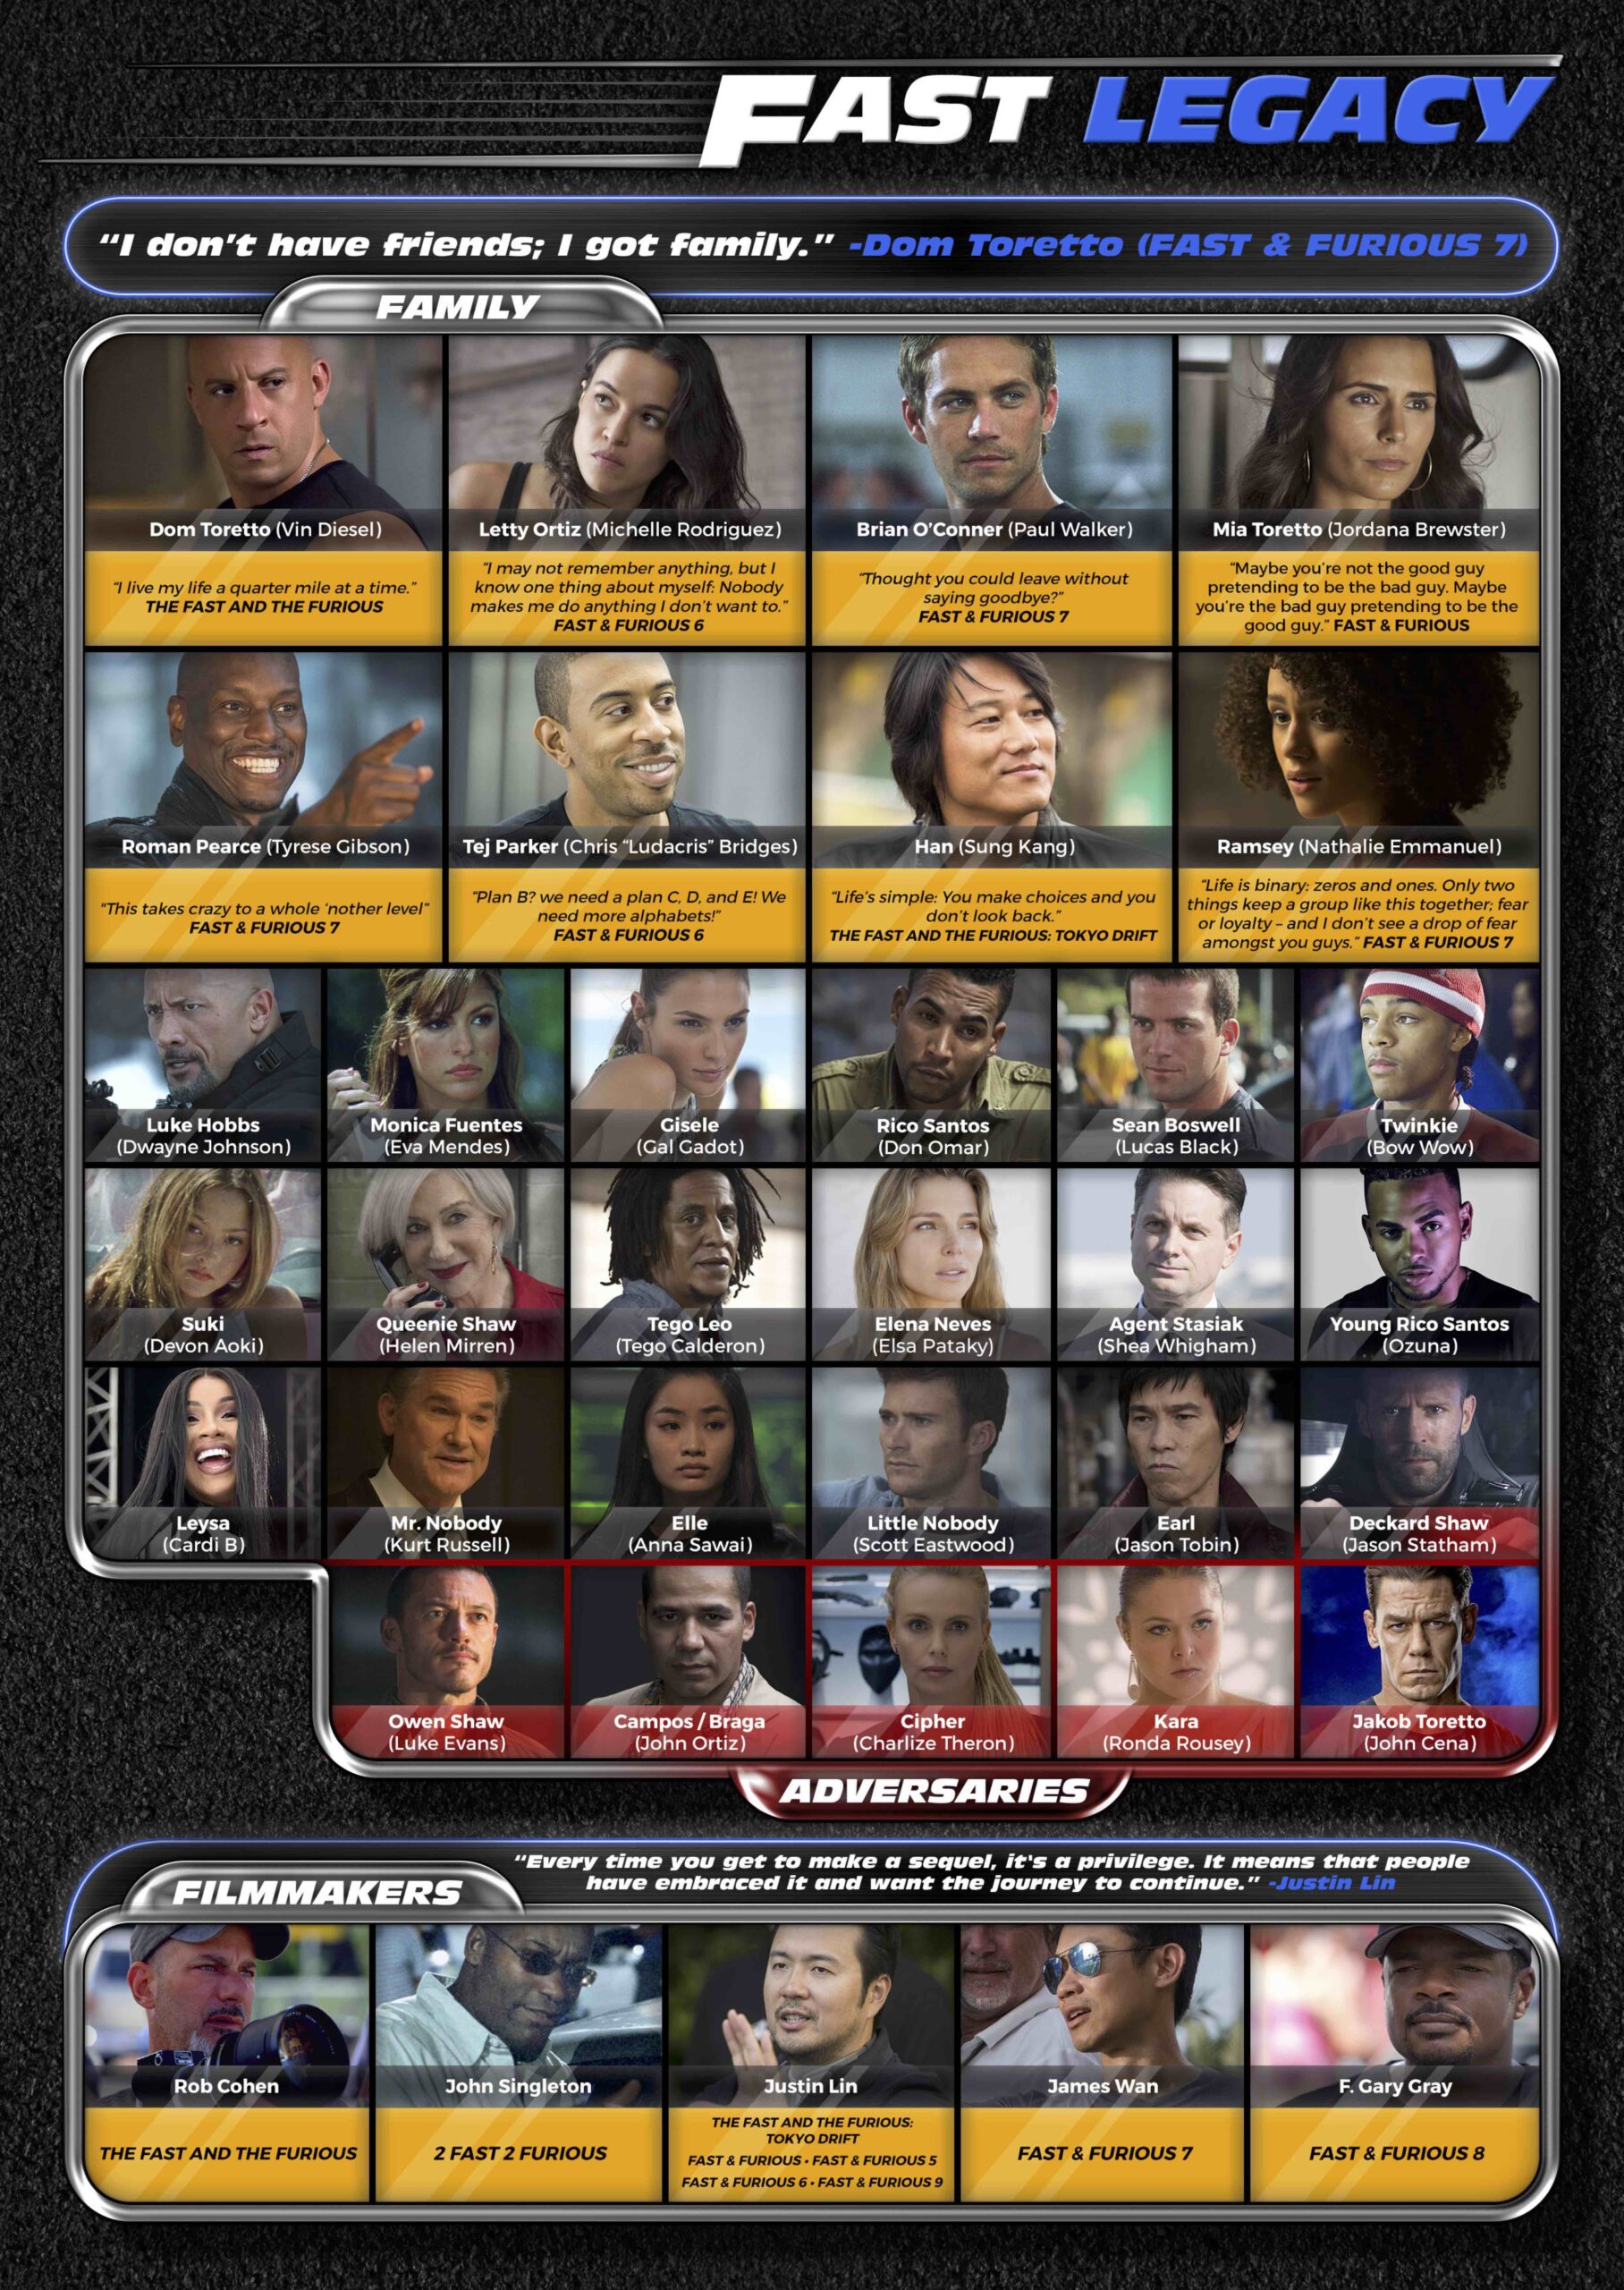 FF9 FactSheet - 20 Years of Fast & Furious